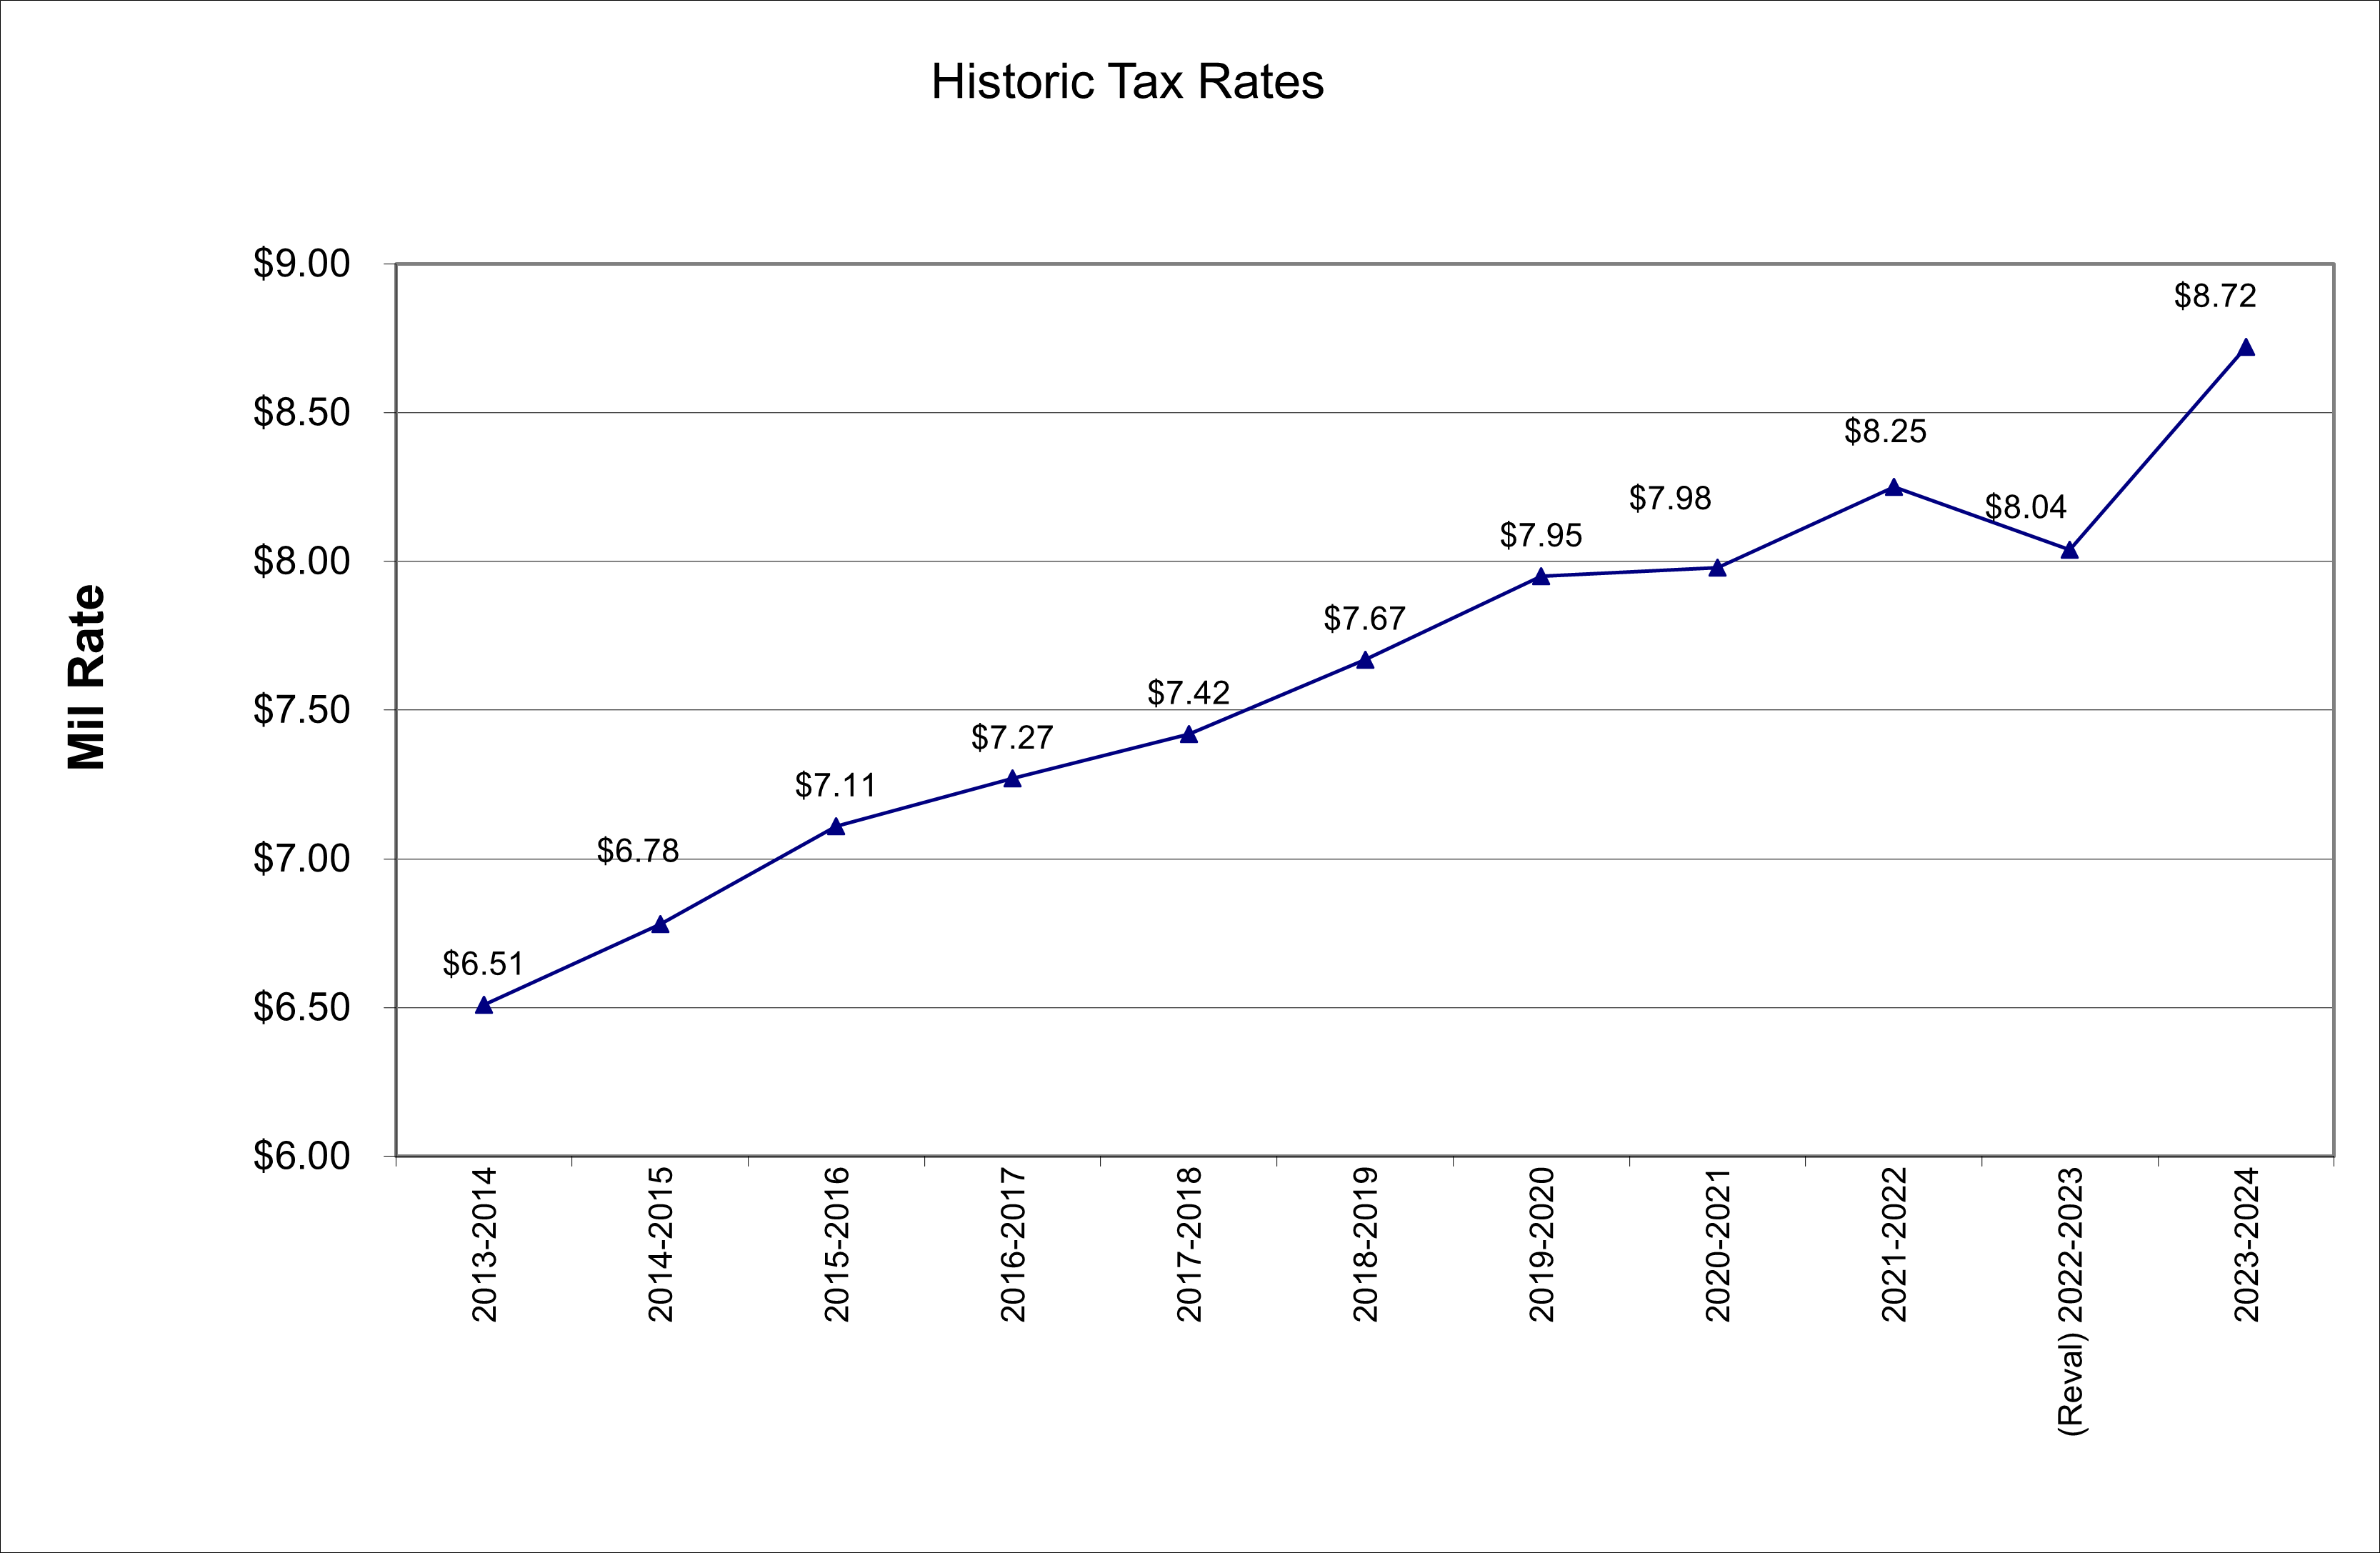 Tax Rate History